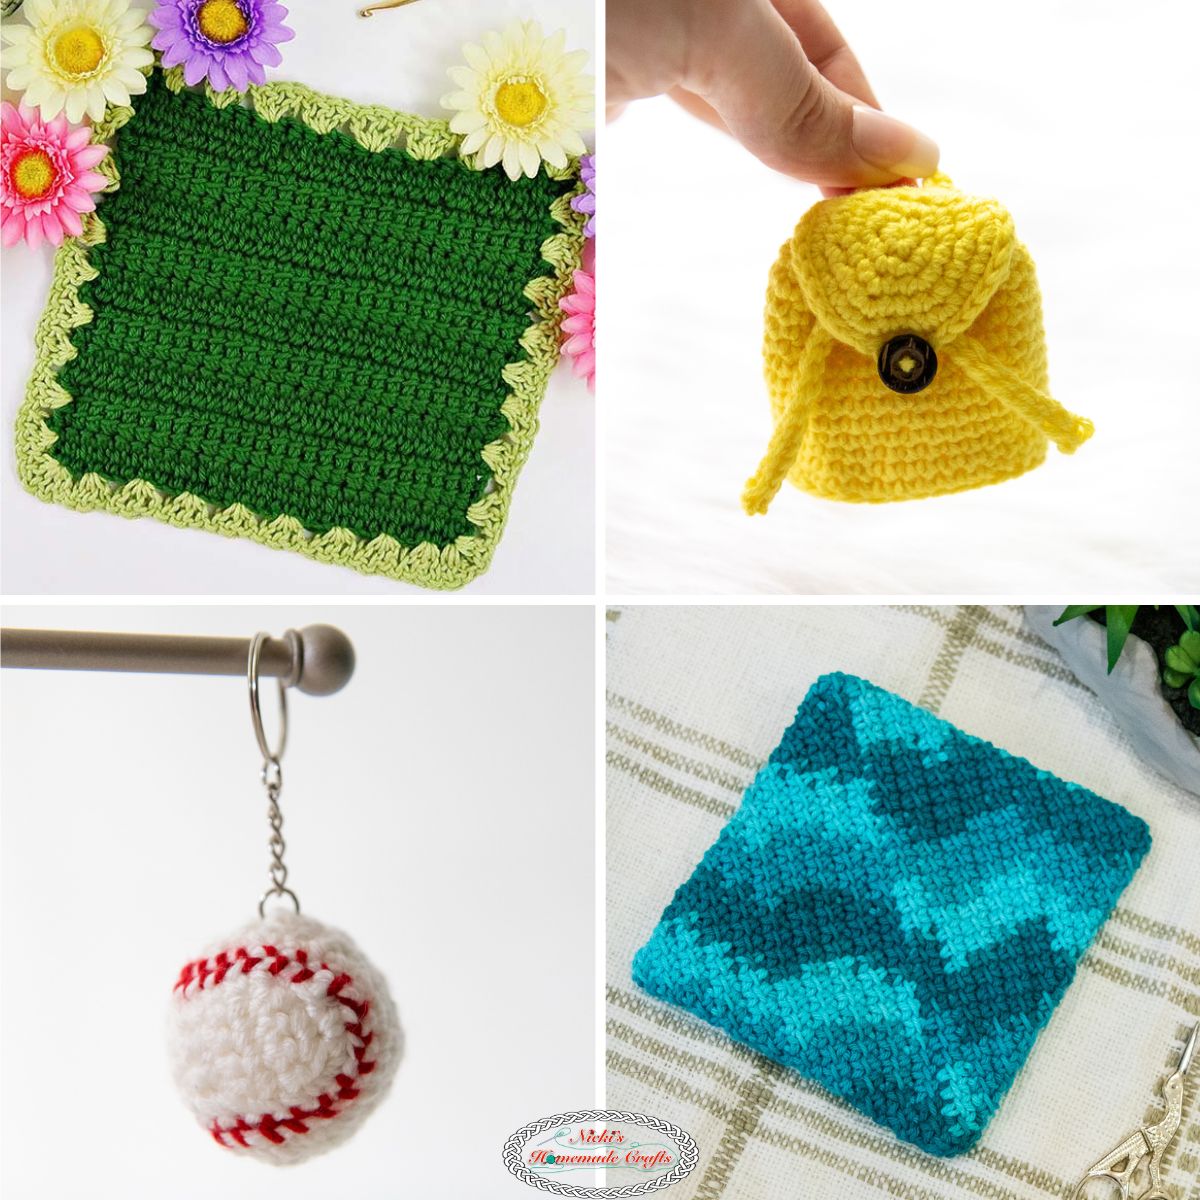 13+ Crochet Easy Projects - KeironSeren